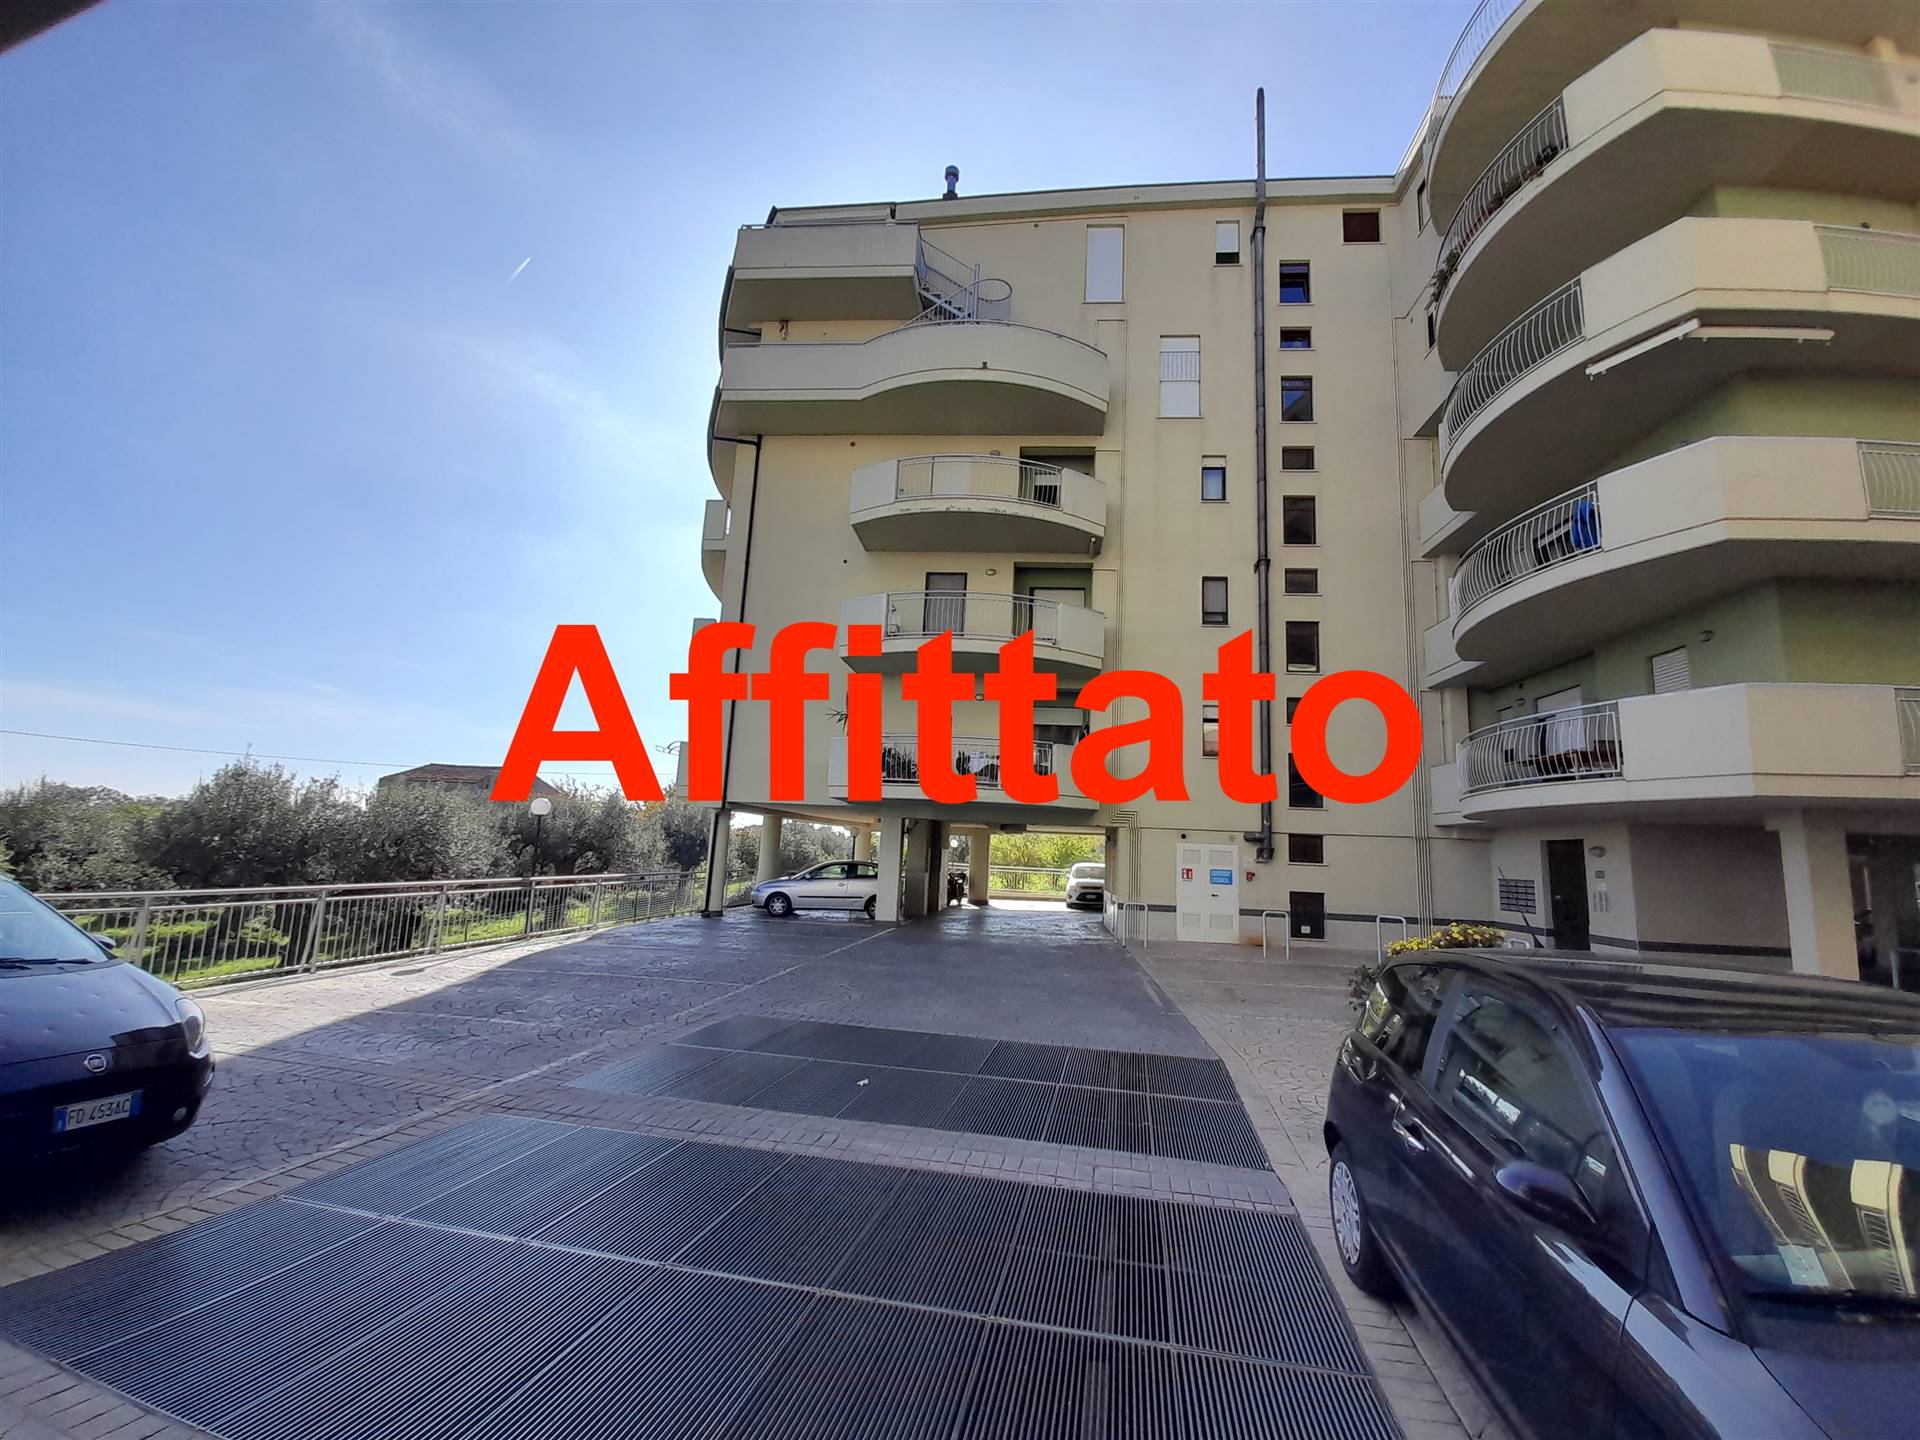 SEMICENTRO, VASTO, Apartment for rent of 100 Sq. mt., Good condition, Heating Individual heating system, Energetic class: G, Epi: 1 kwh/m2 year, 